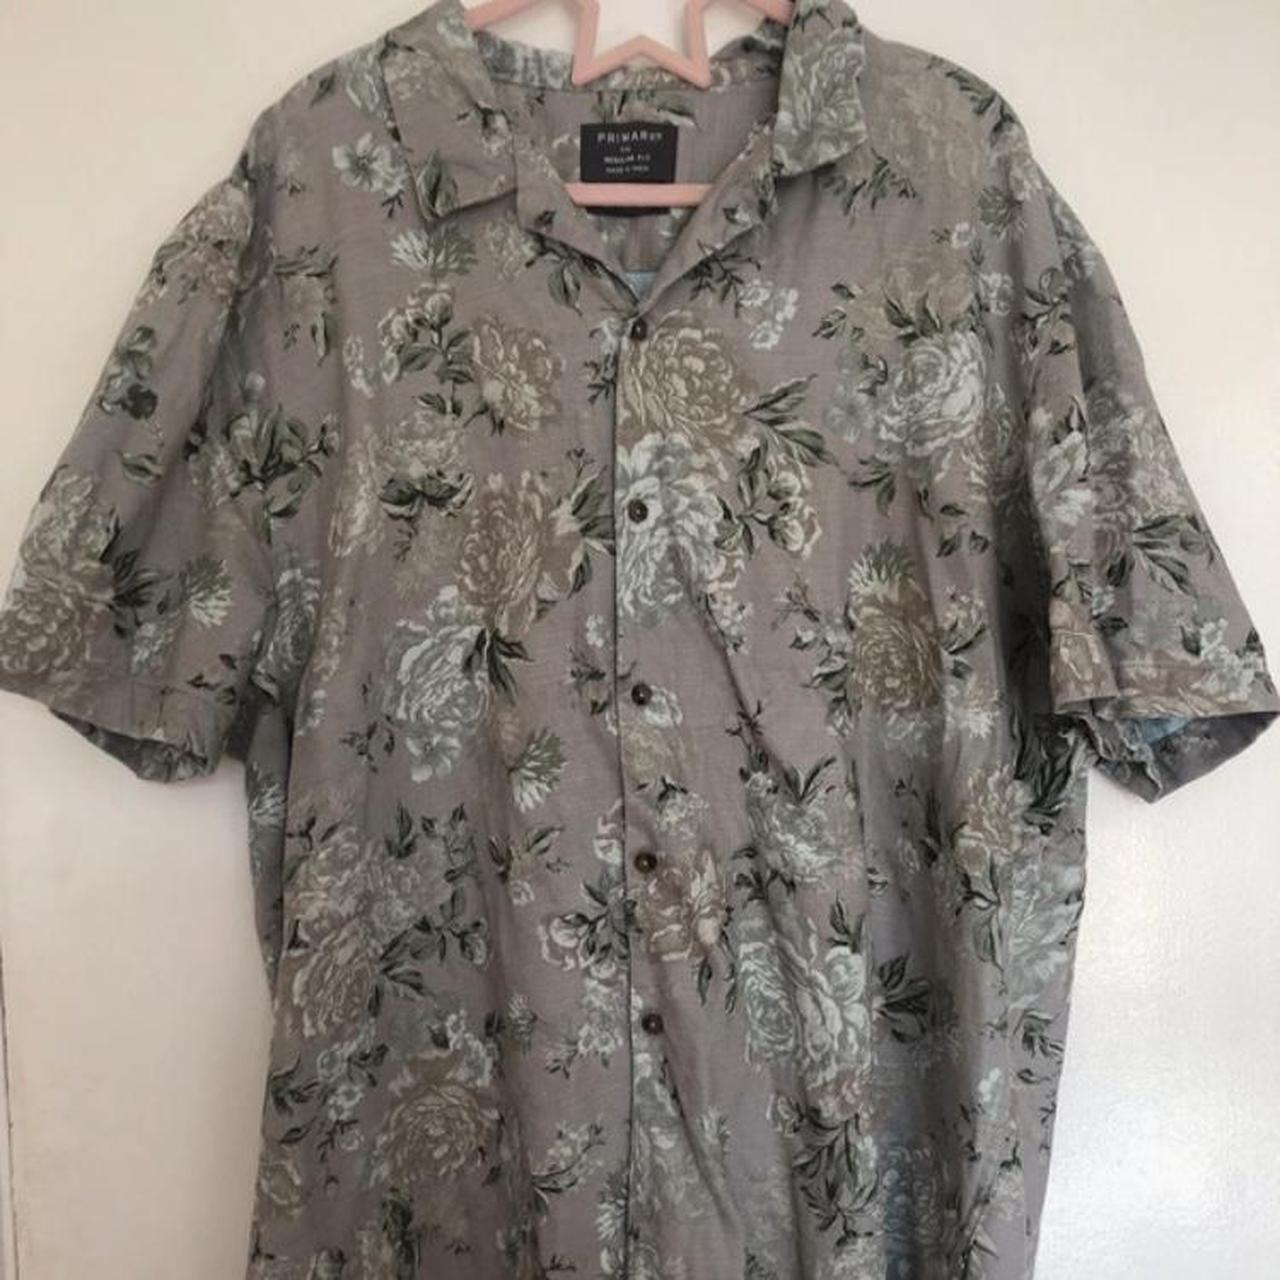 Gorgeous floral shirt, only worn once so perfect... - Depop